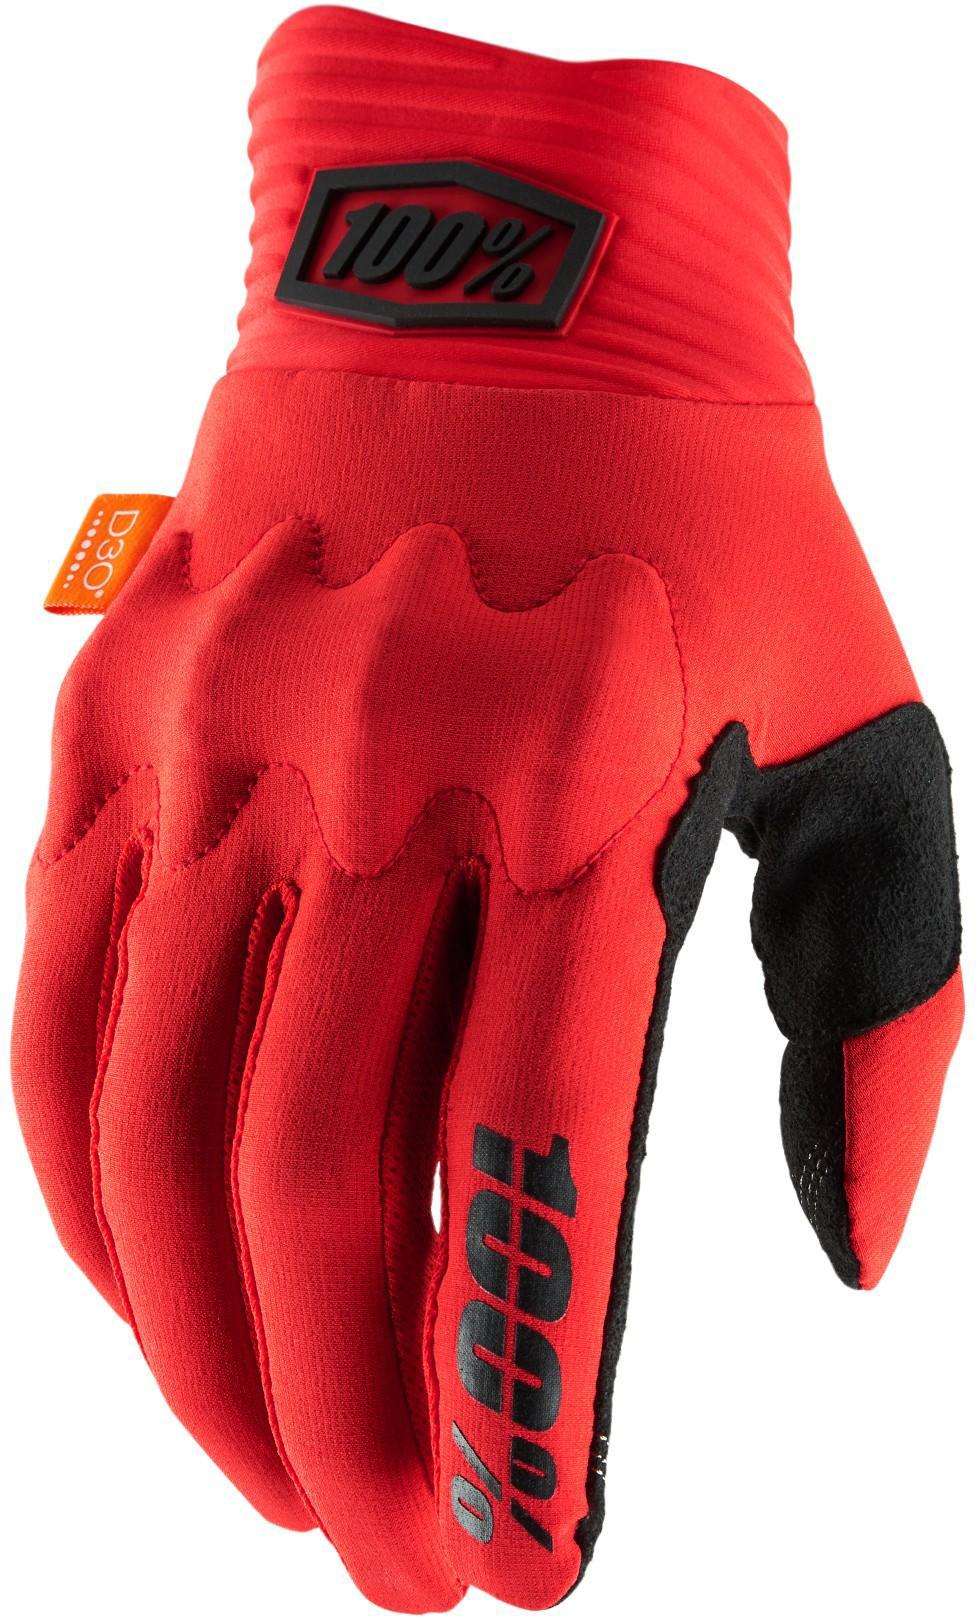 100% Cognito D30 Gloves - Red/black